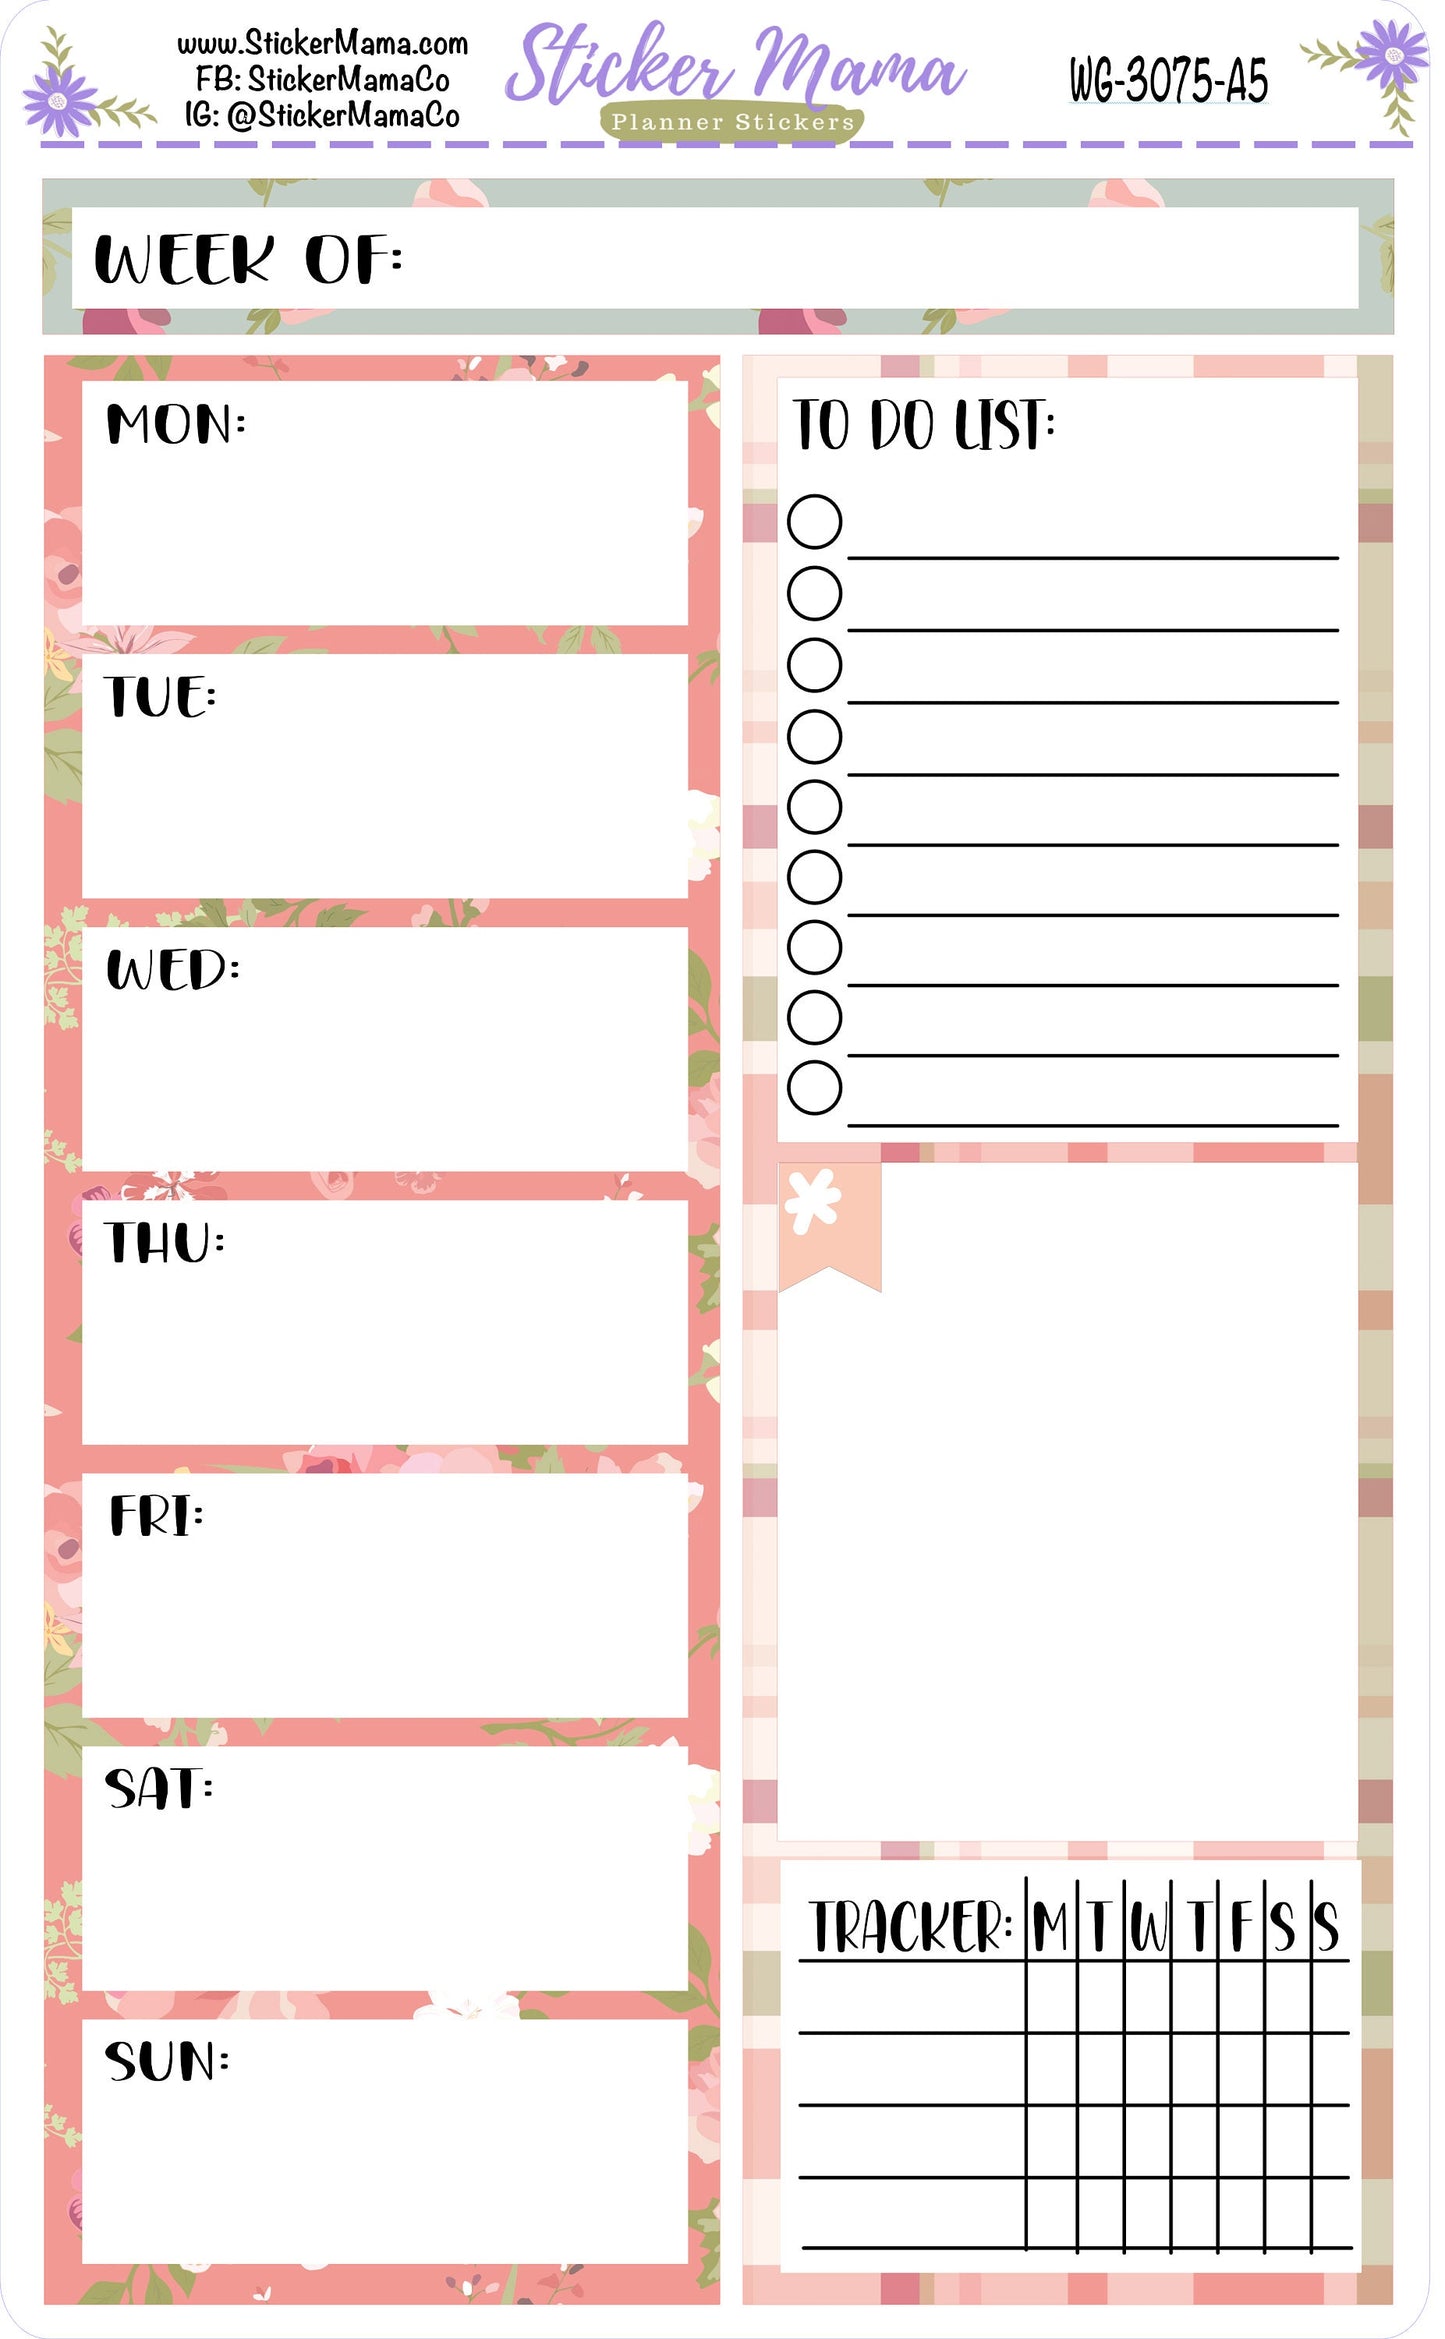 WG-3075 - WEEK at a GLANCE - Shabby Chic Roses - weekly glance 7x9 or a5